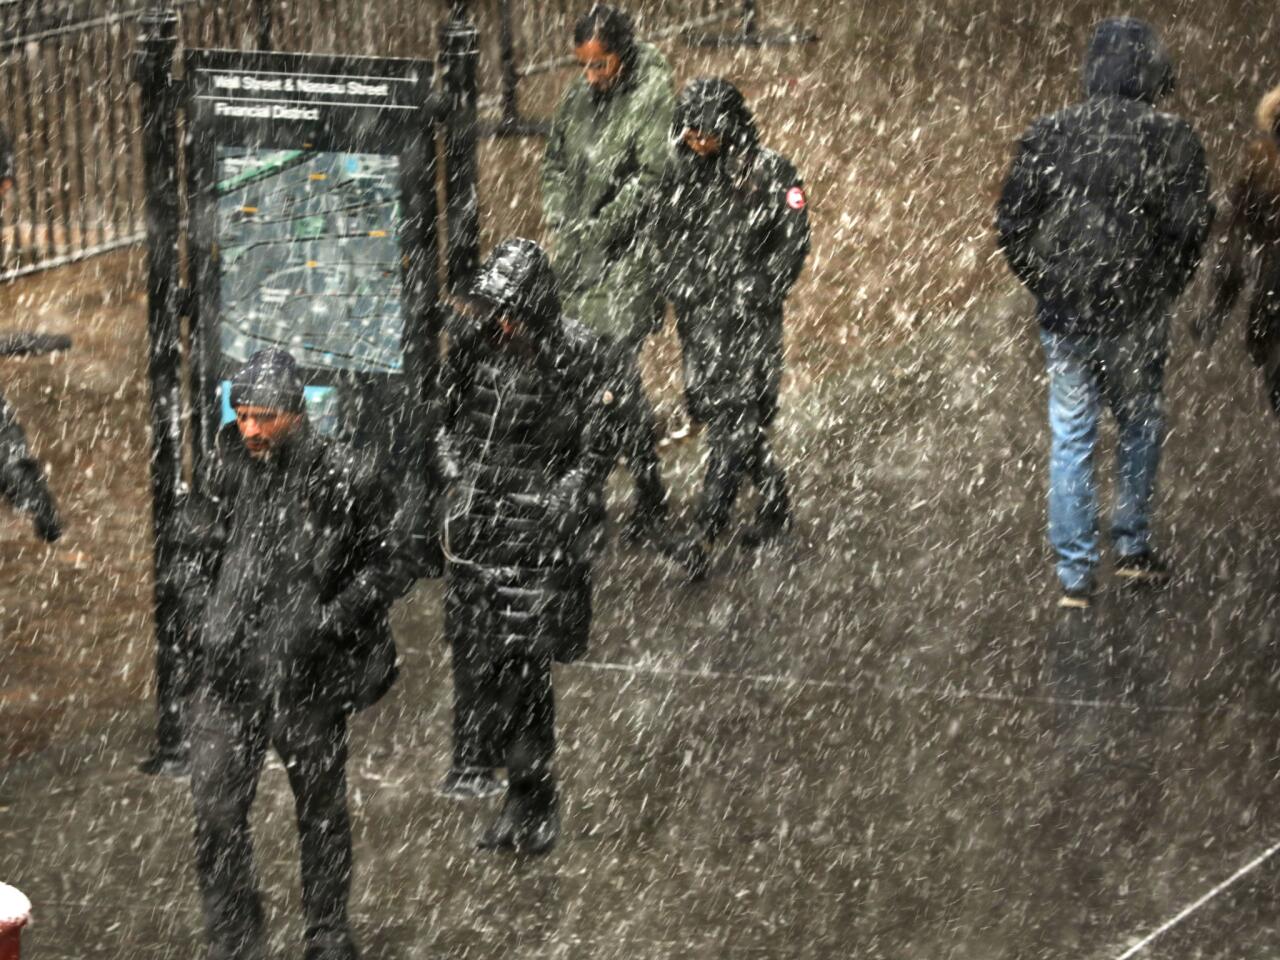 People walk through the snow in lower Manhattan as extremely cold temperatures are predicted for New York City in the coming days as a Polar Vortex, which is now over parts of the midwest, heads towards the region.